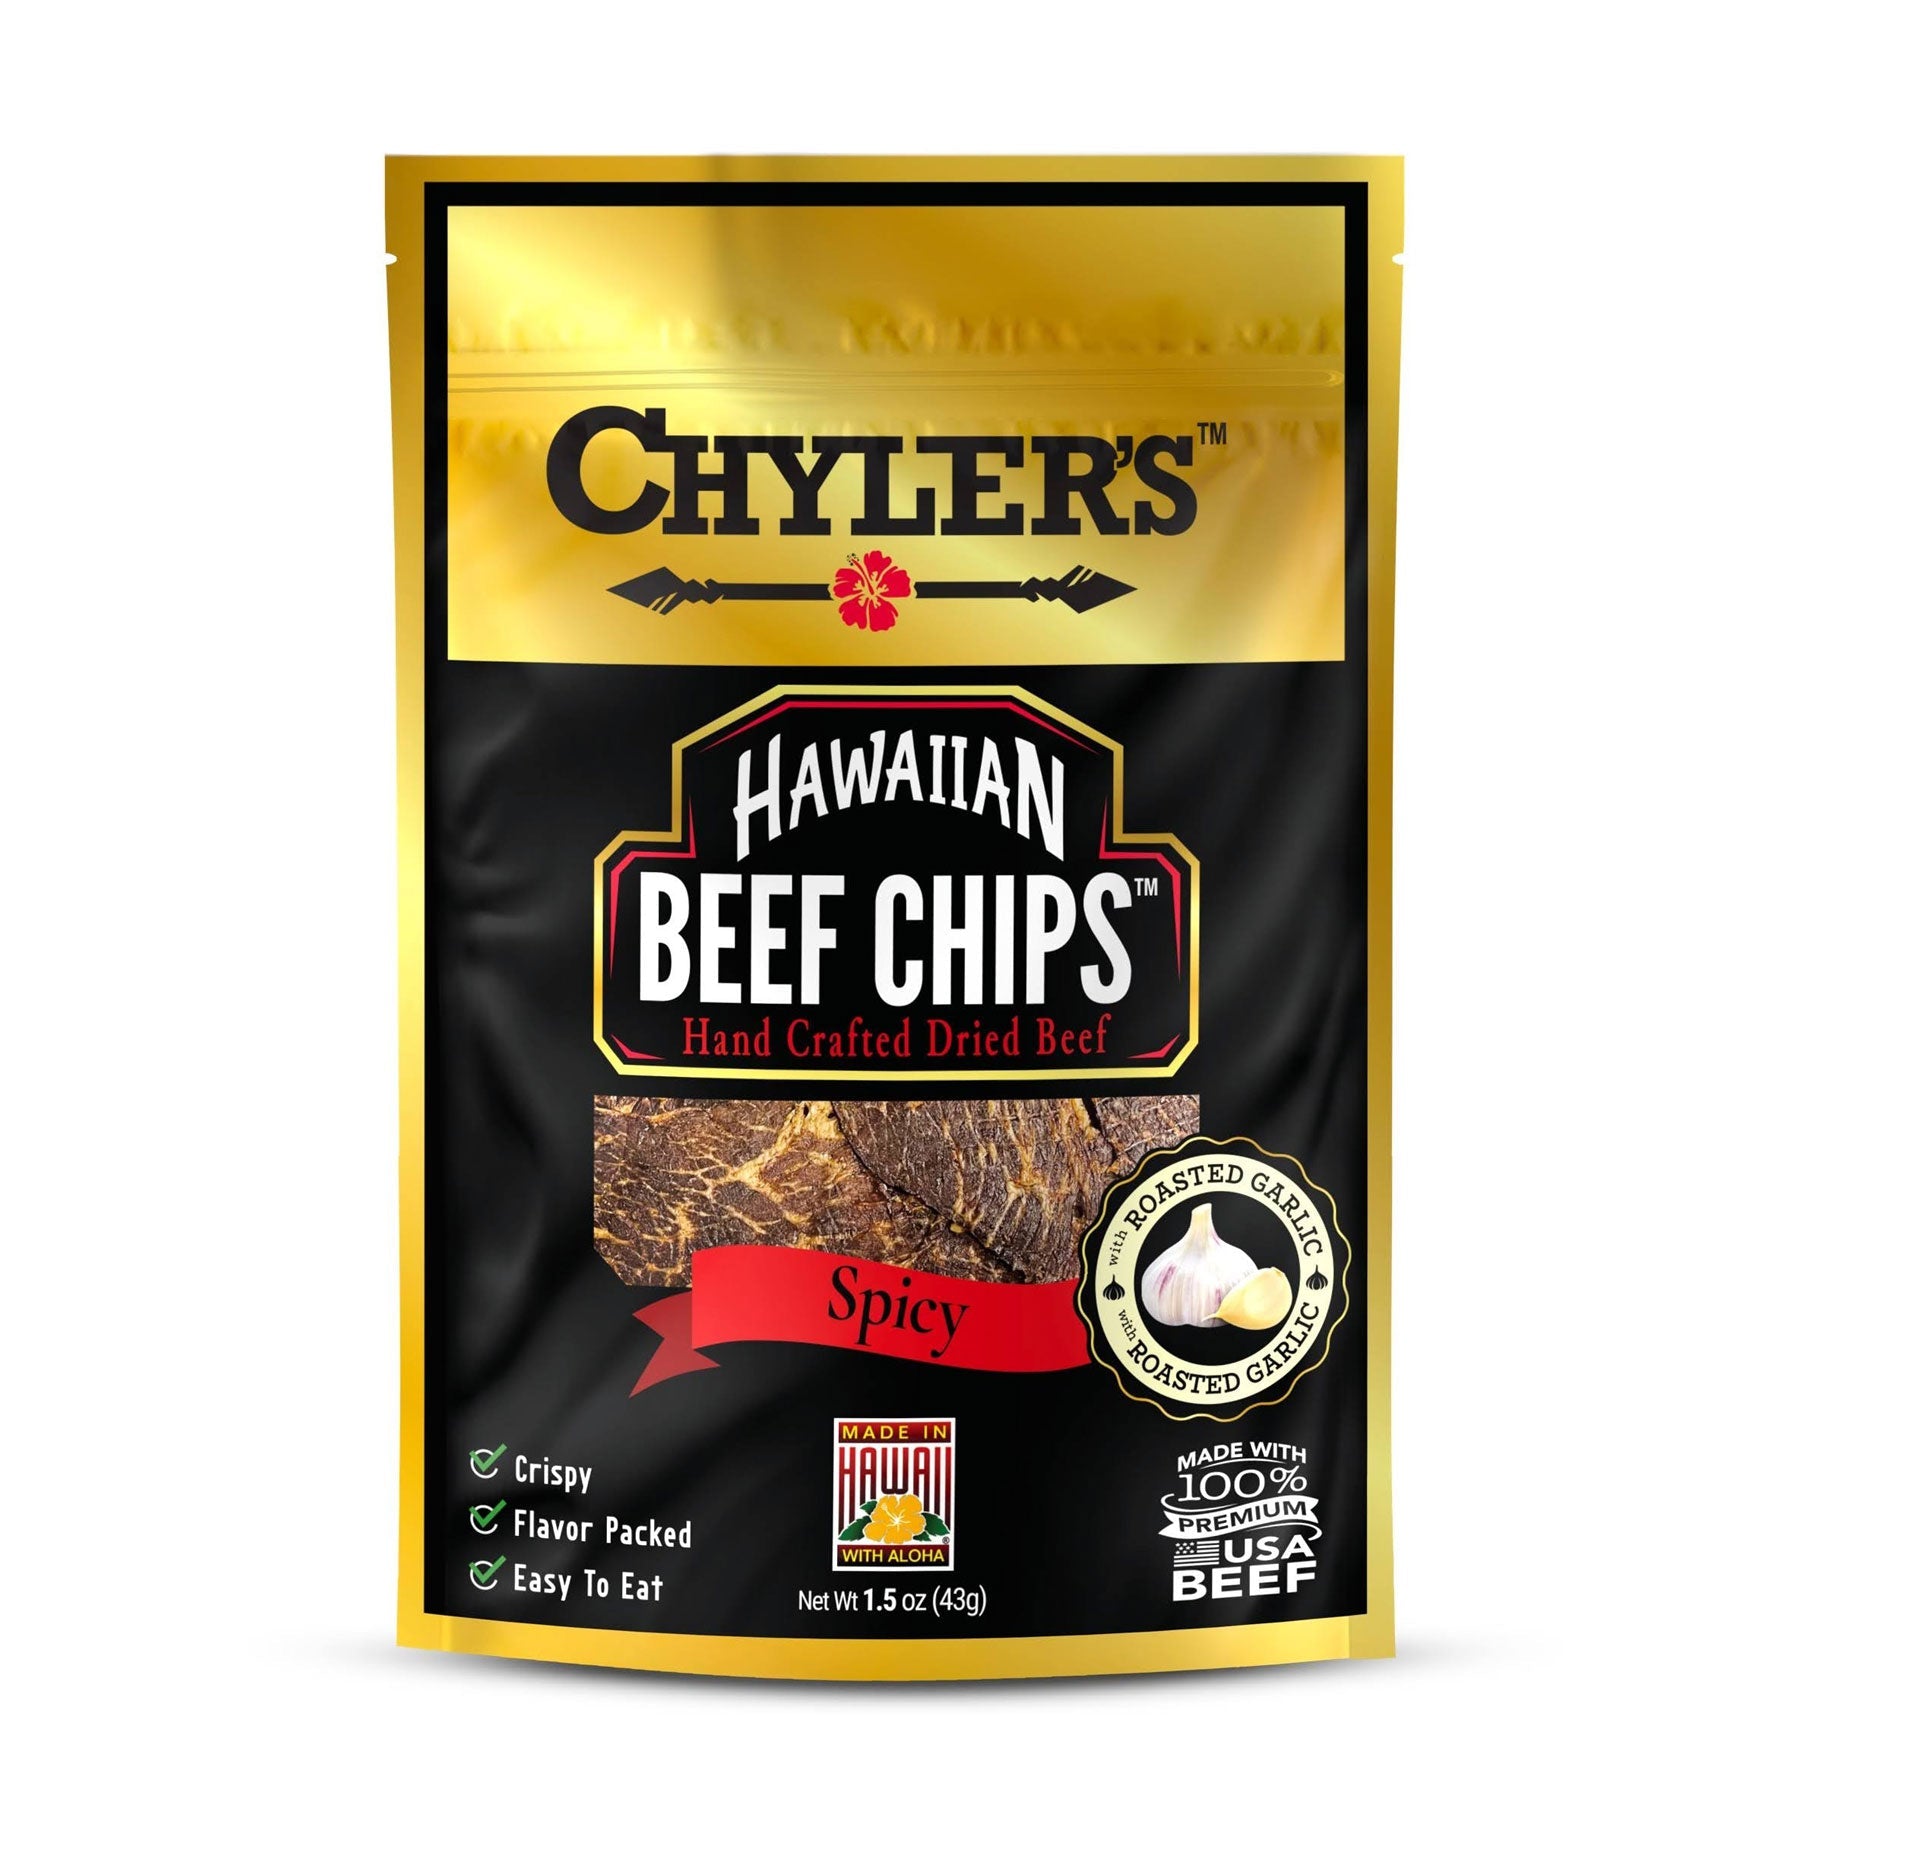 Hawaiian Beef Chips™ Spicy with Roasted Garlic - Chylers